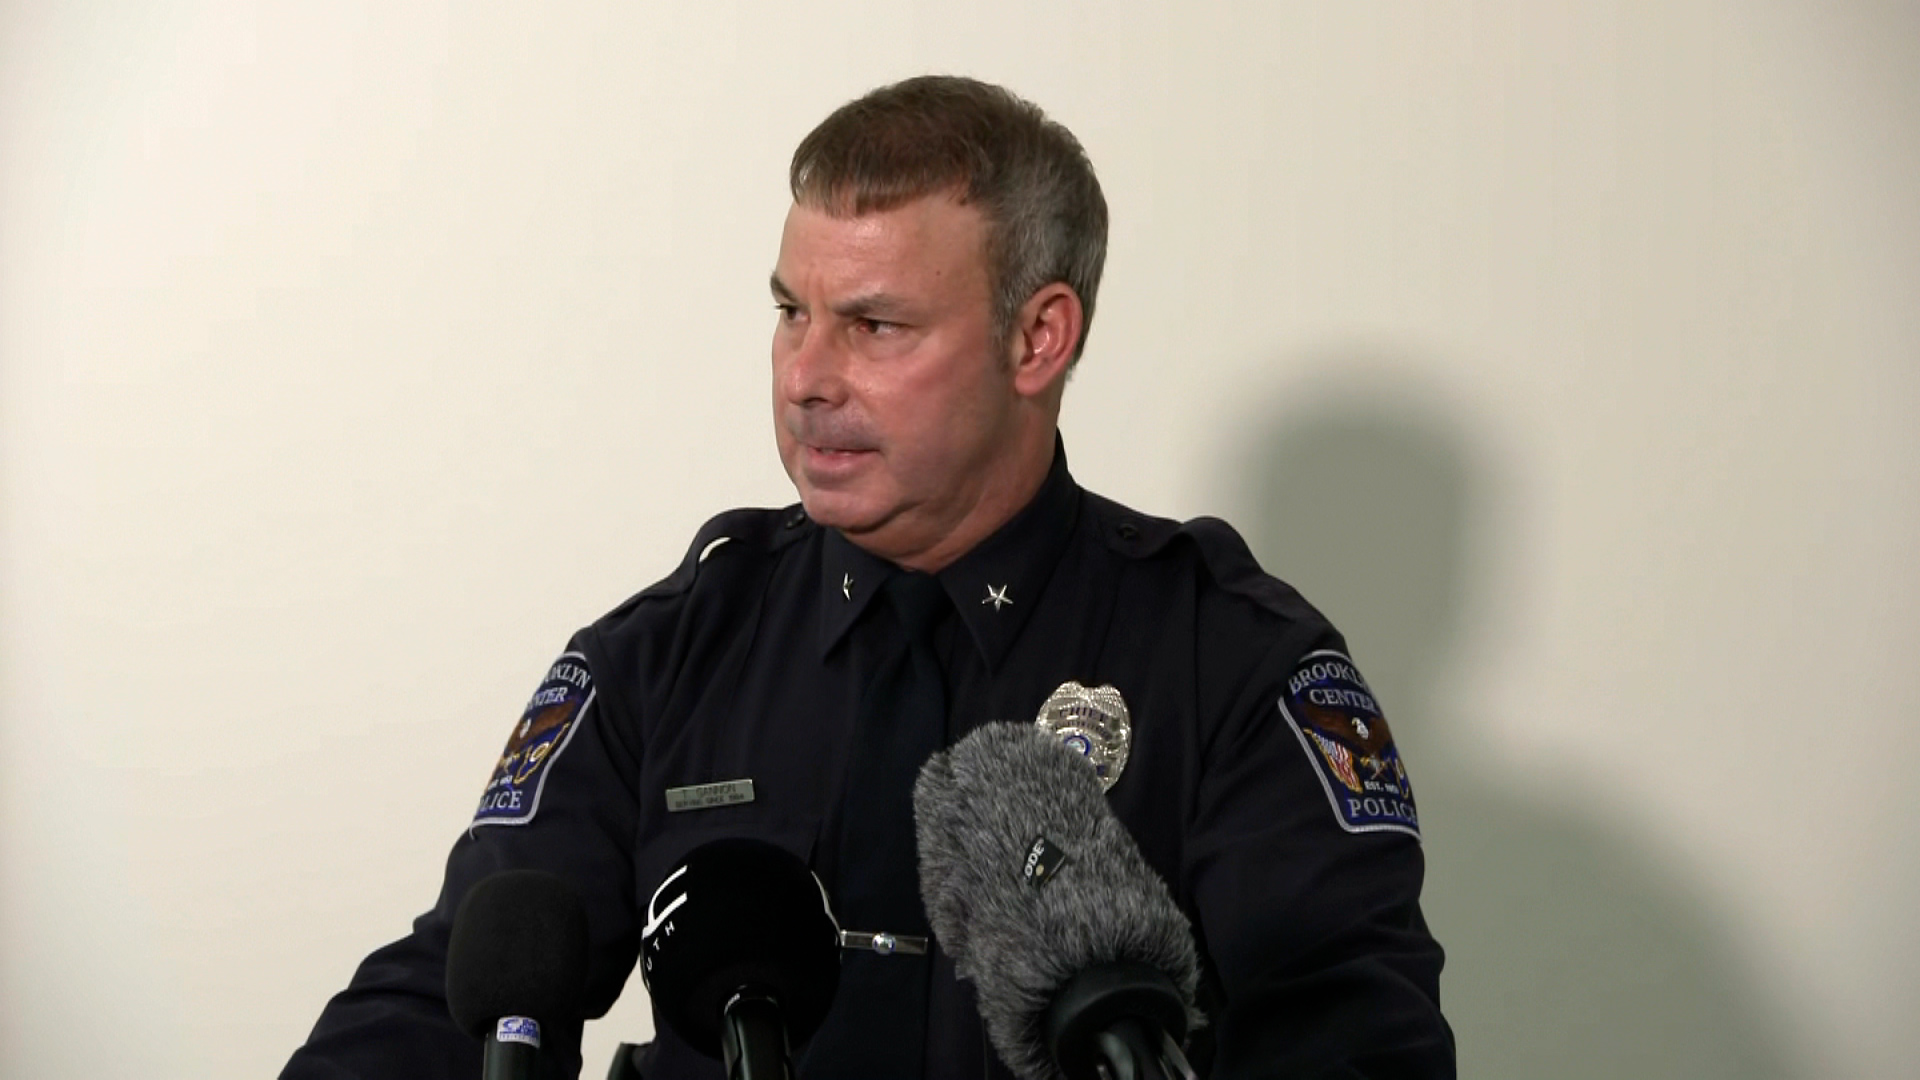 Brooklyn Center Police Chief Tim Gannon speaks at a press conference on Monday.